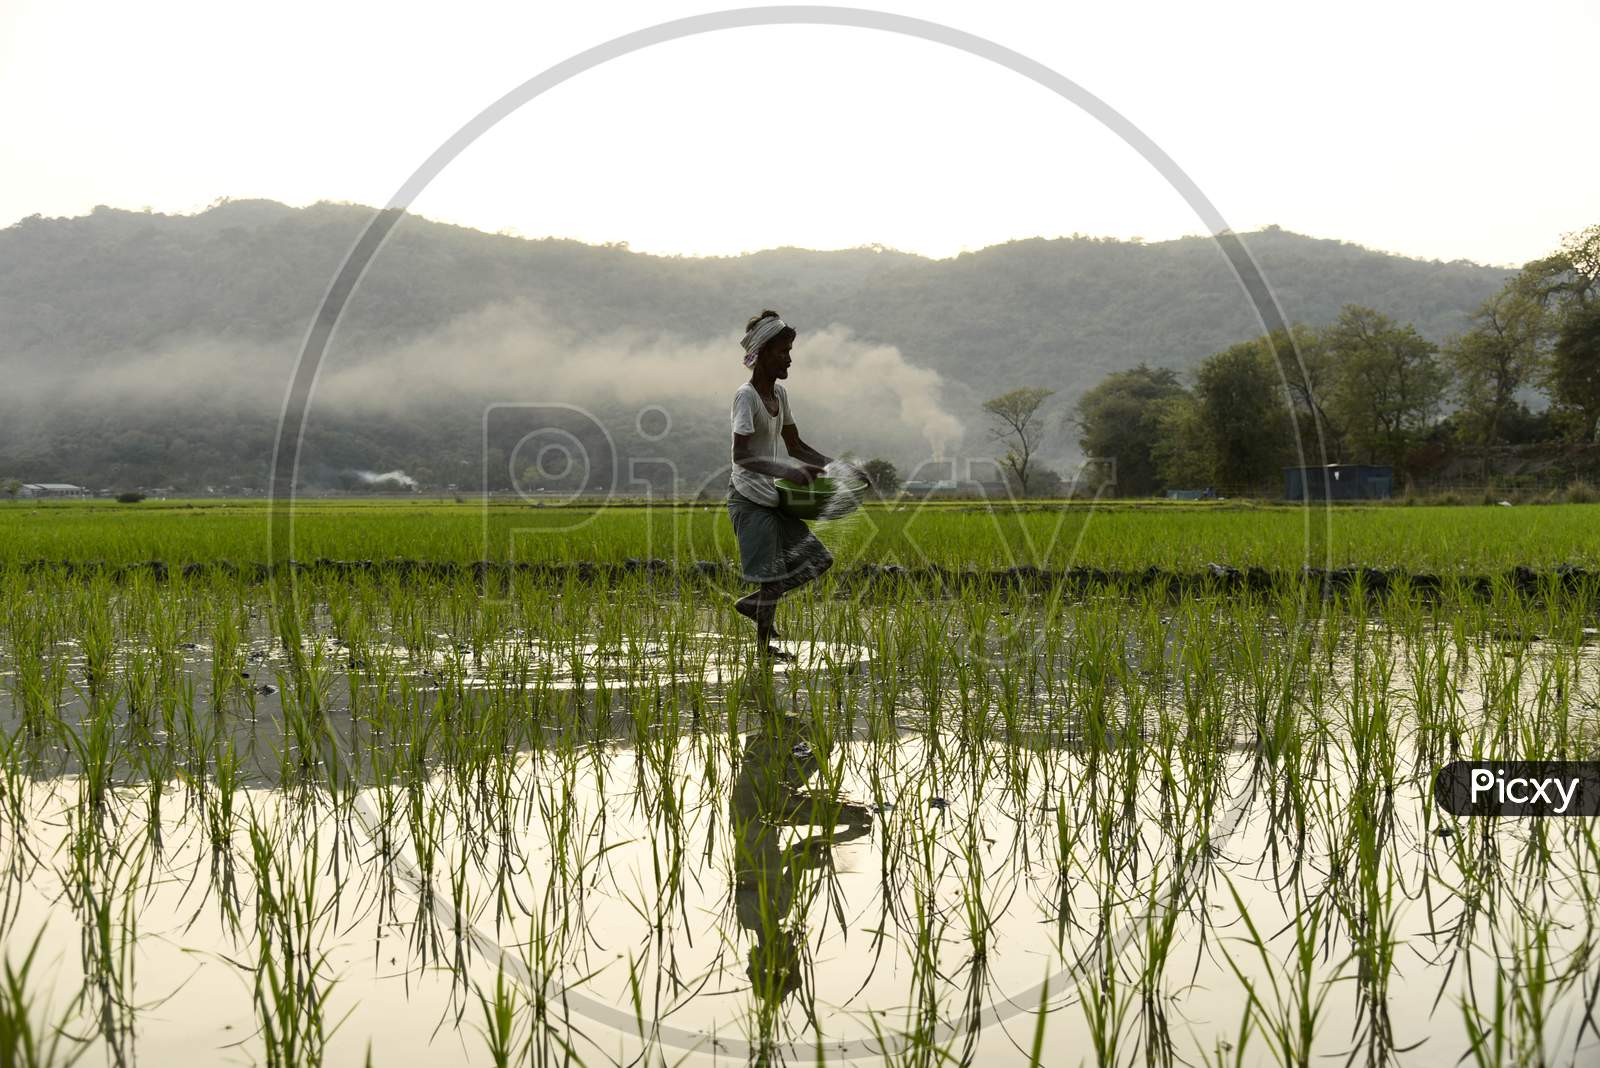 An Indian Farmer Scatters Fertilizer In His Newly Planted Paddy Field In The Morigaon District Of Assam, India, 1 March 2020